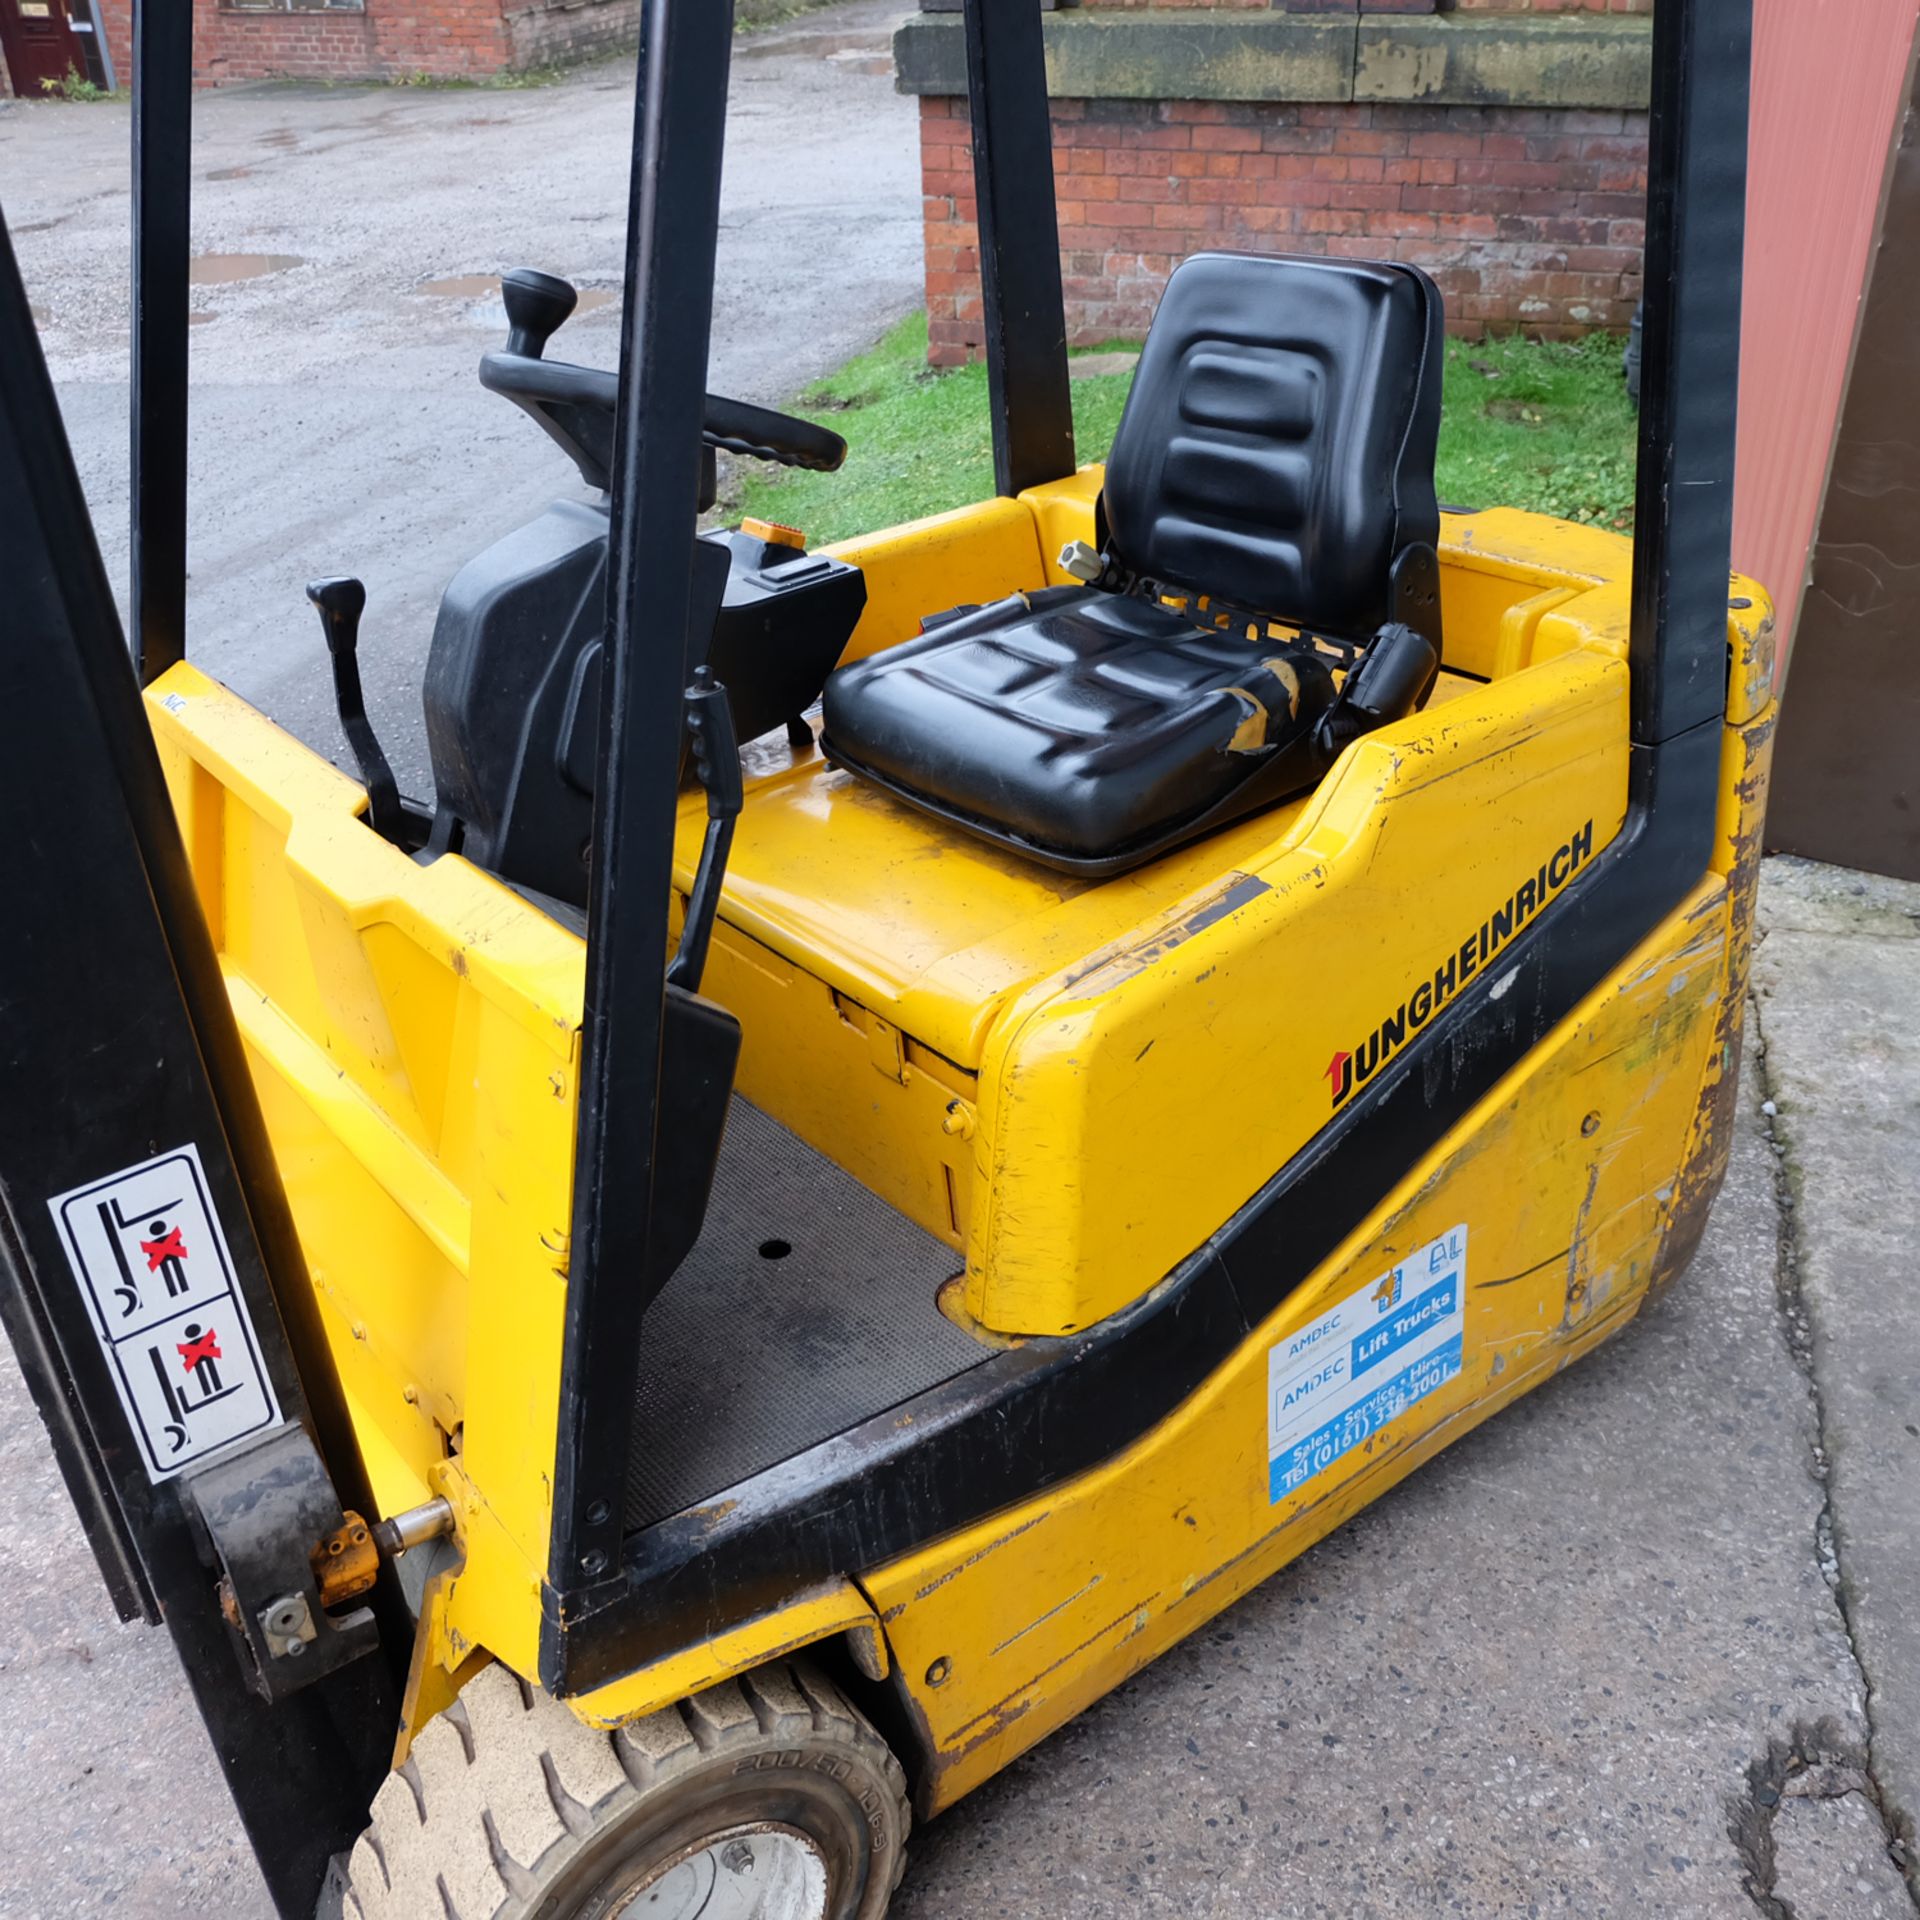 Jungheinrich 3 Wheel Electric Forklift Truck with Associated Charger. (1997) - Image 5 of 16